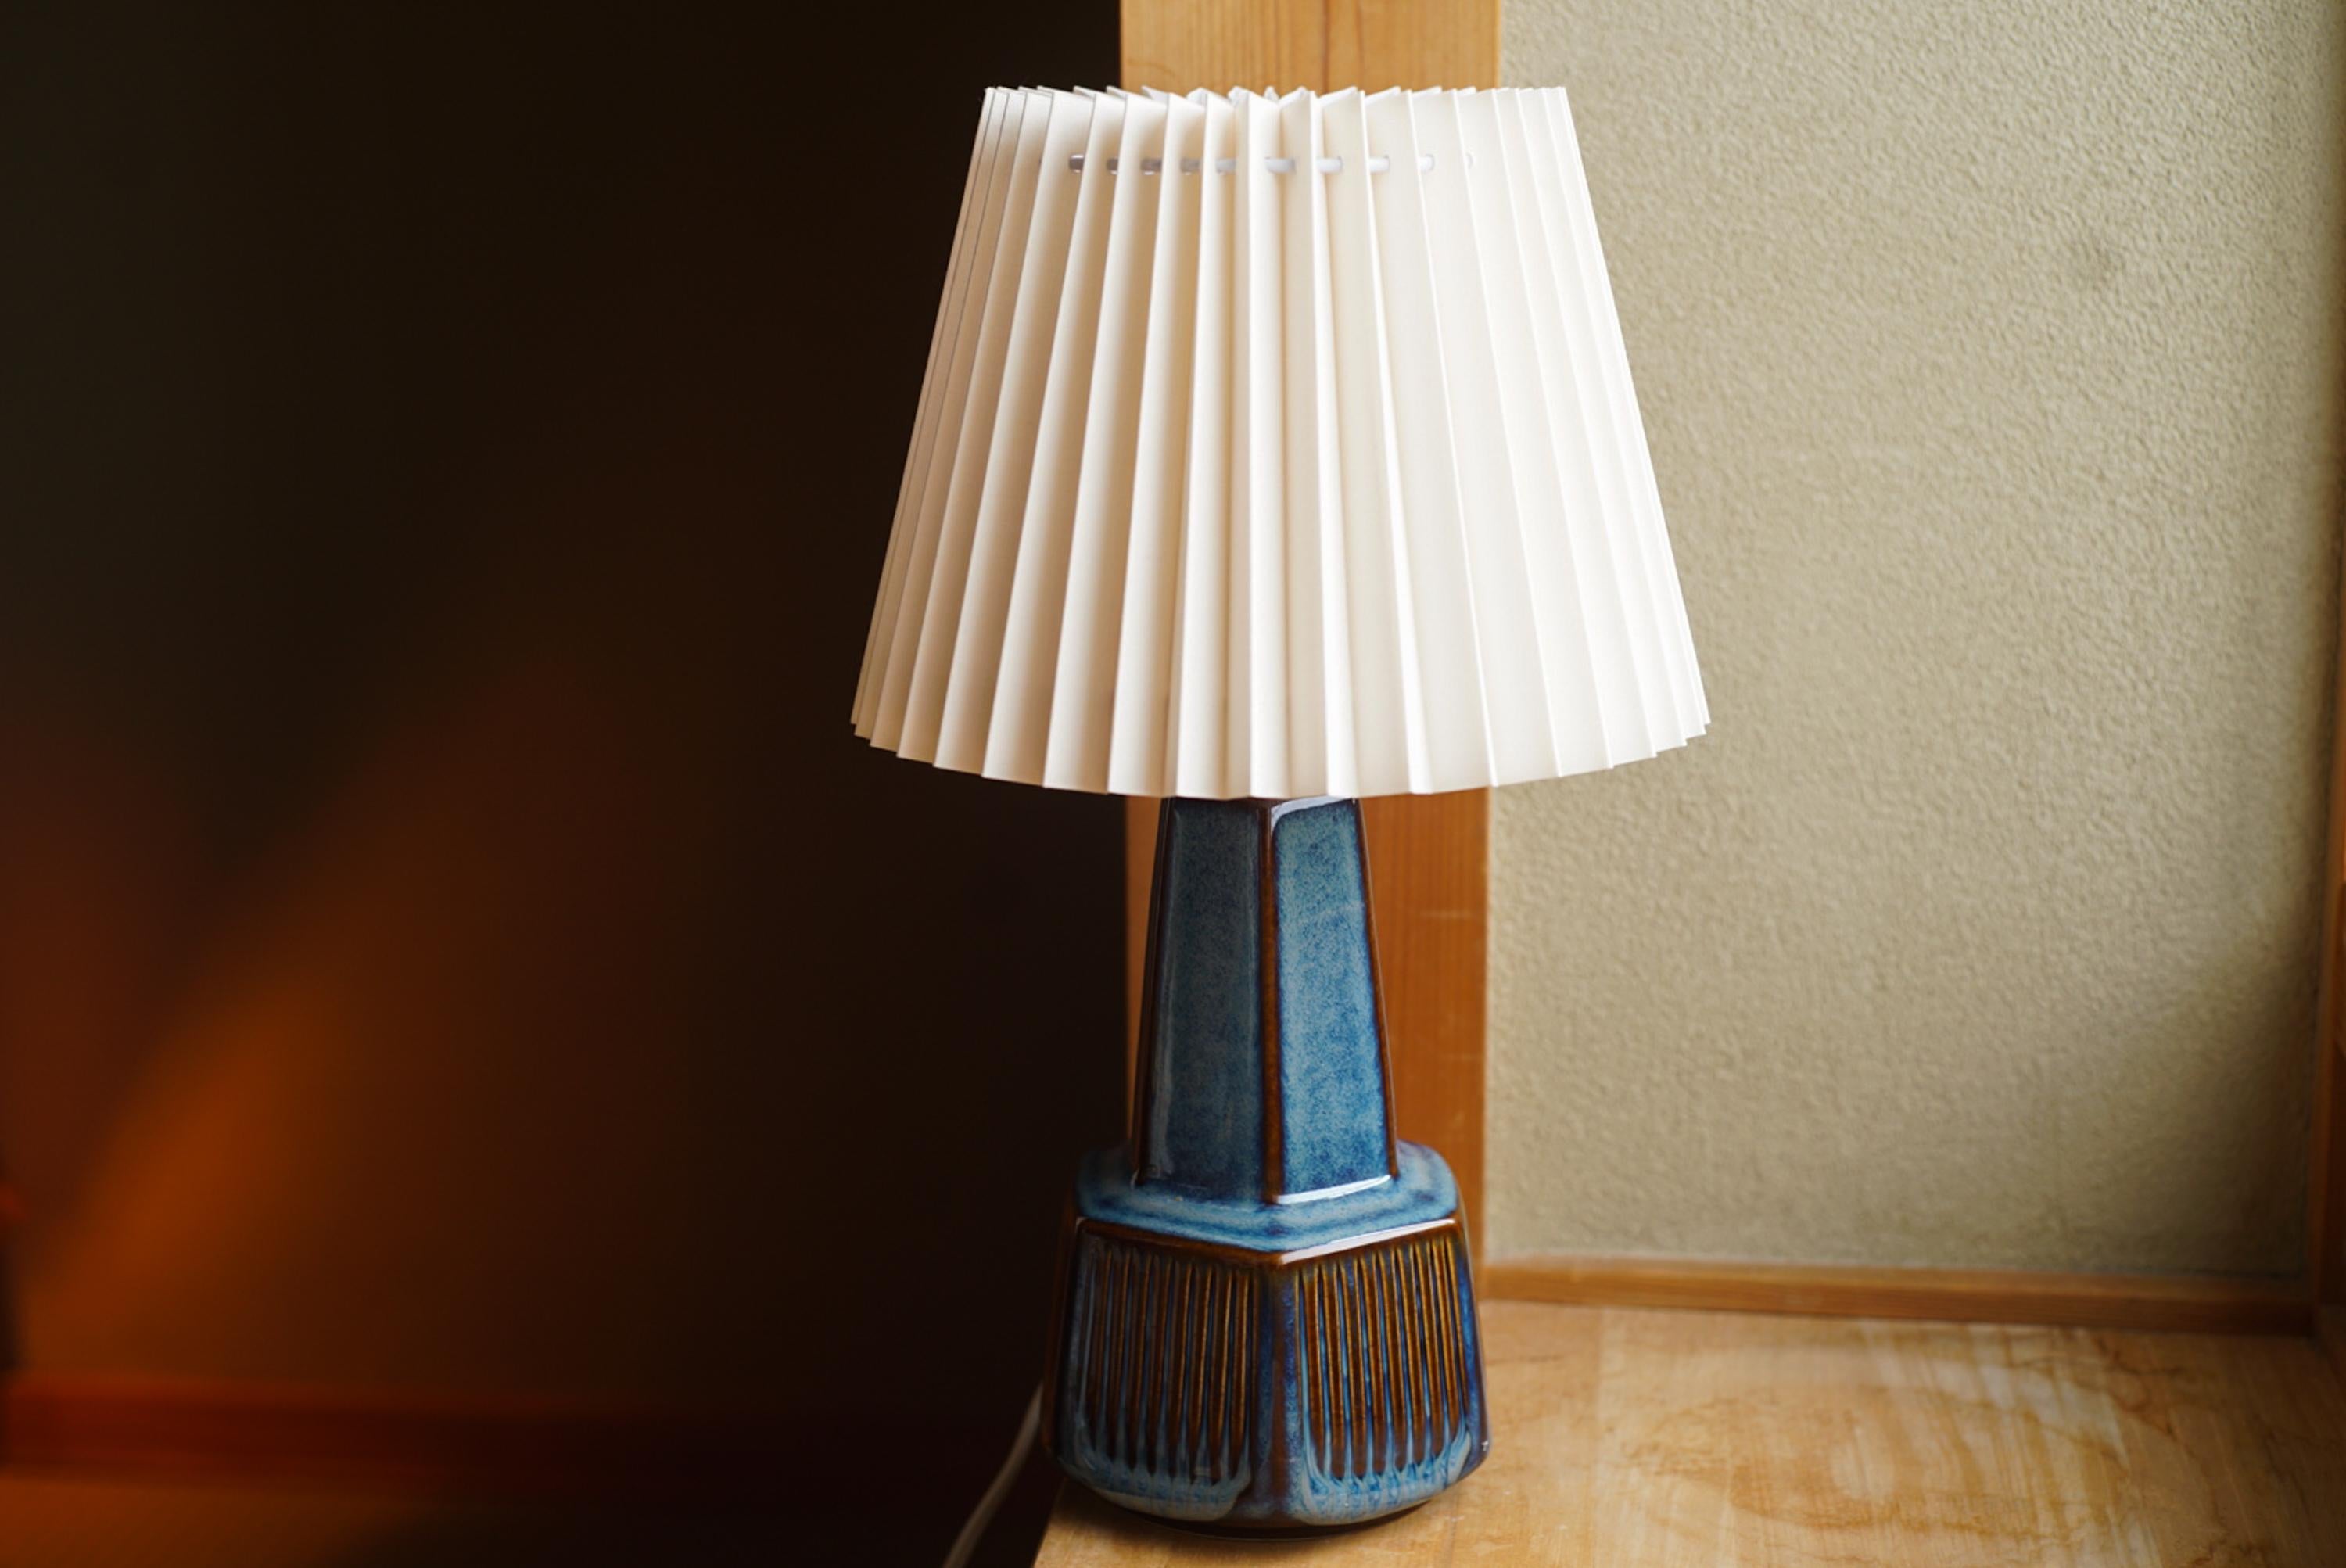 A stoneware table lamp handmade by Einar Johansenfor Danish Søholm located on the island of Bornholm in Denmark in the 1960s.

Stamped and signed on the base.

Sold without lampshade. Height includes socket. fully functional and in beautiful